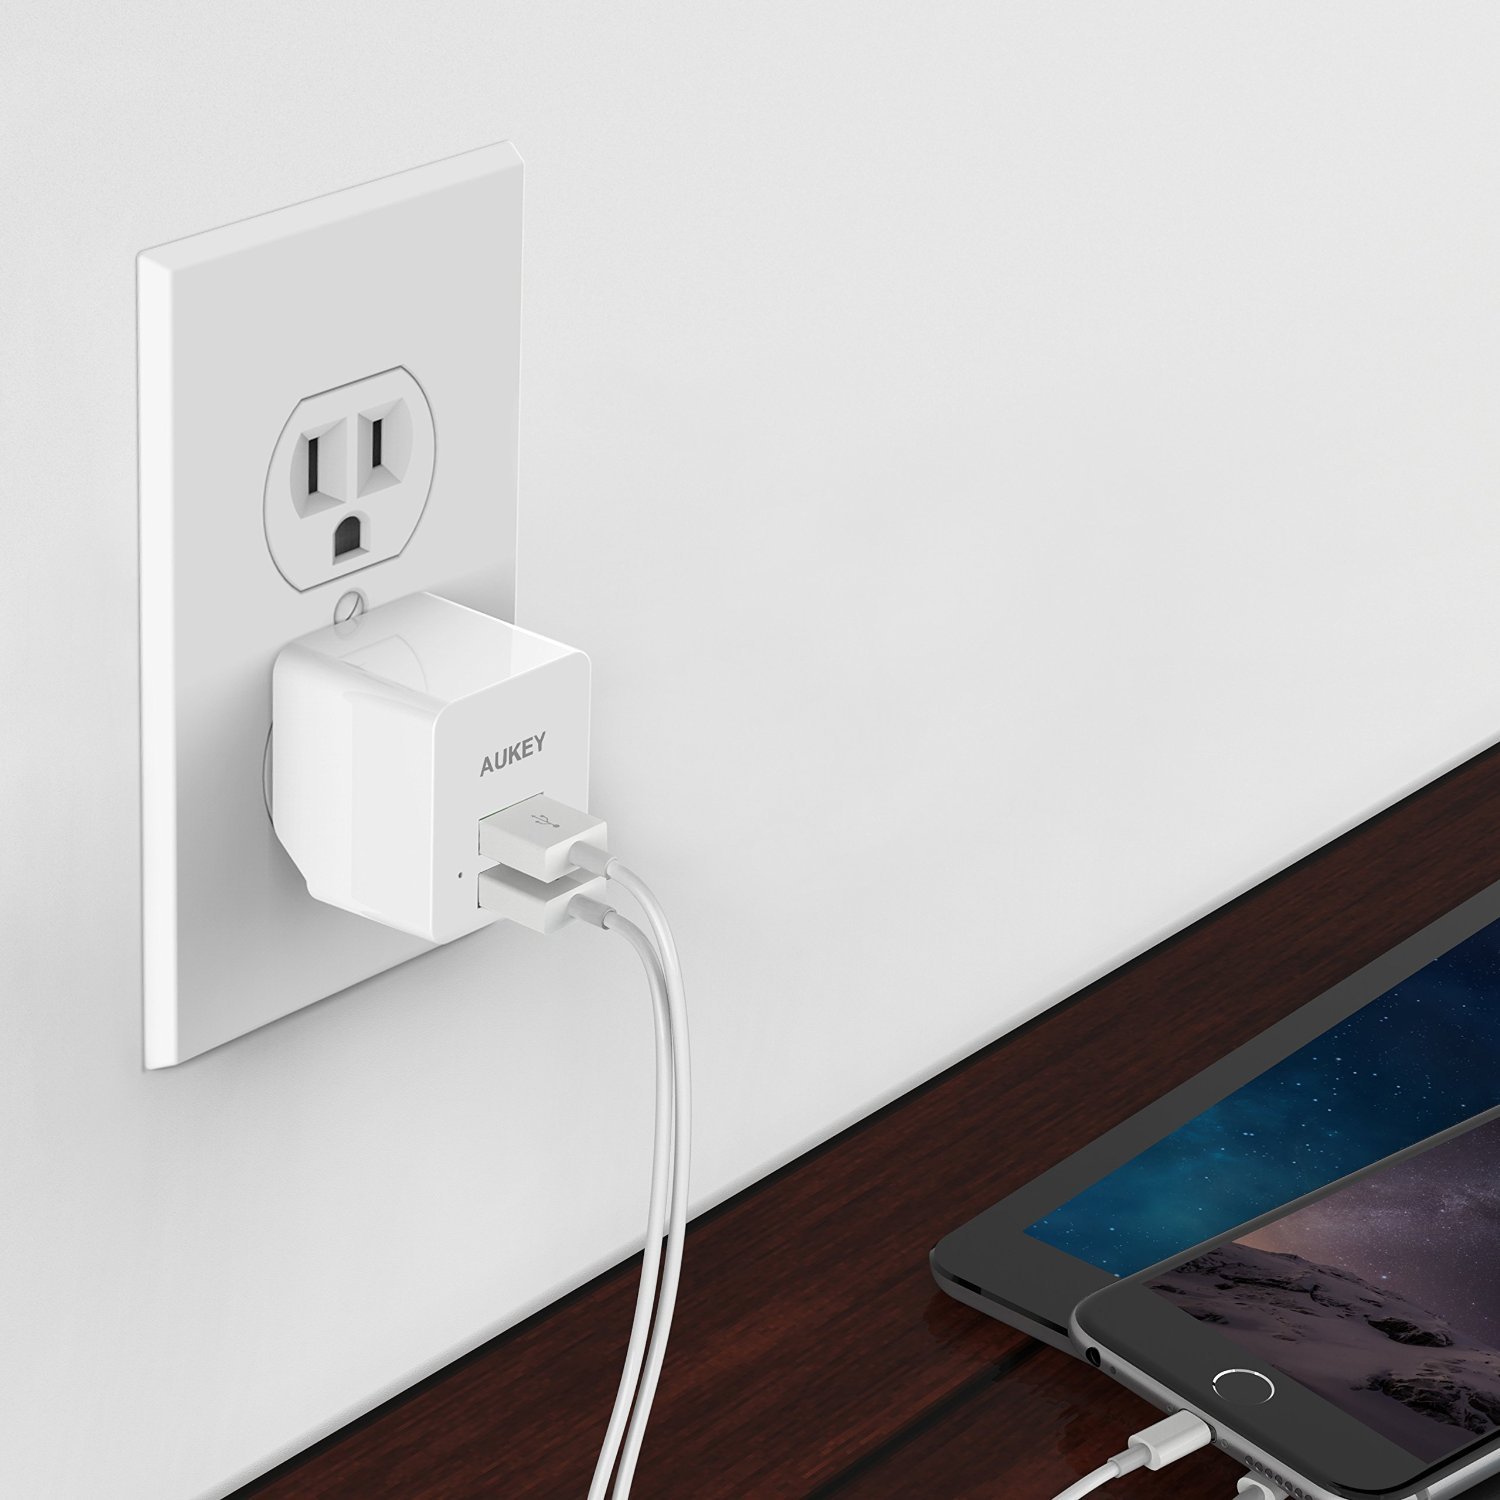 Aukey universal USB wall charger with foldable plug for $6